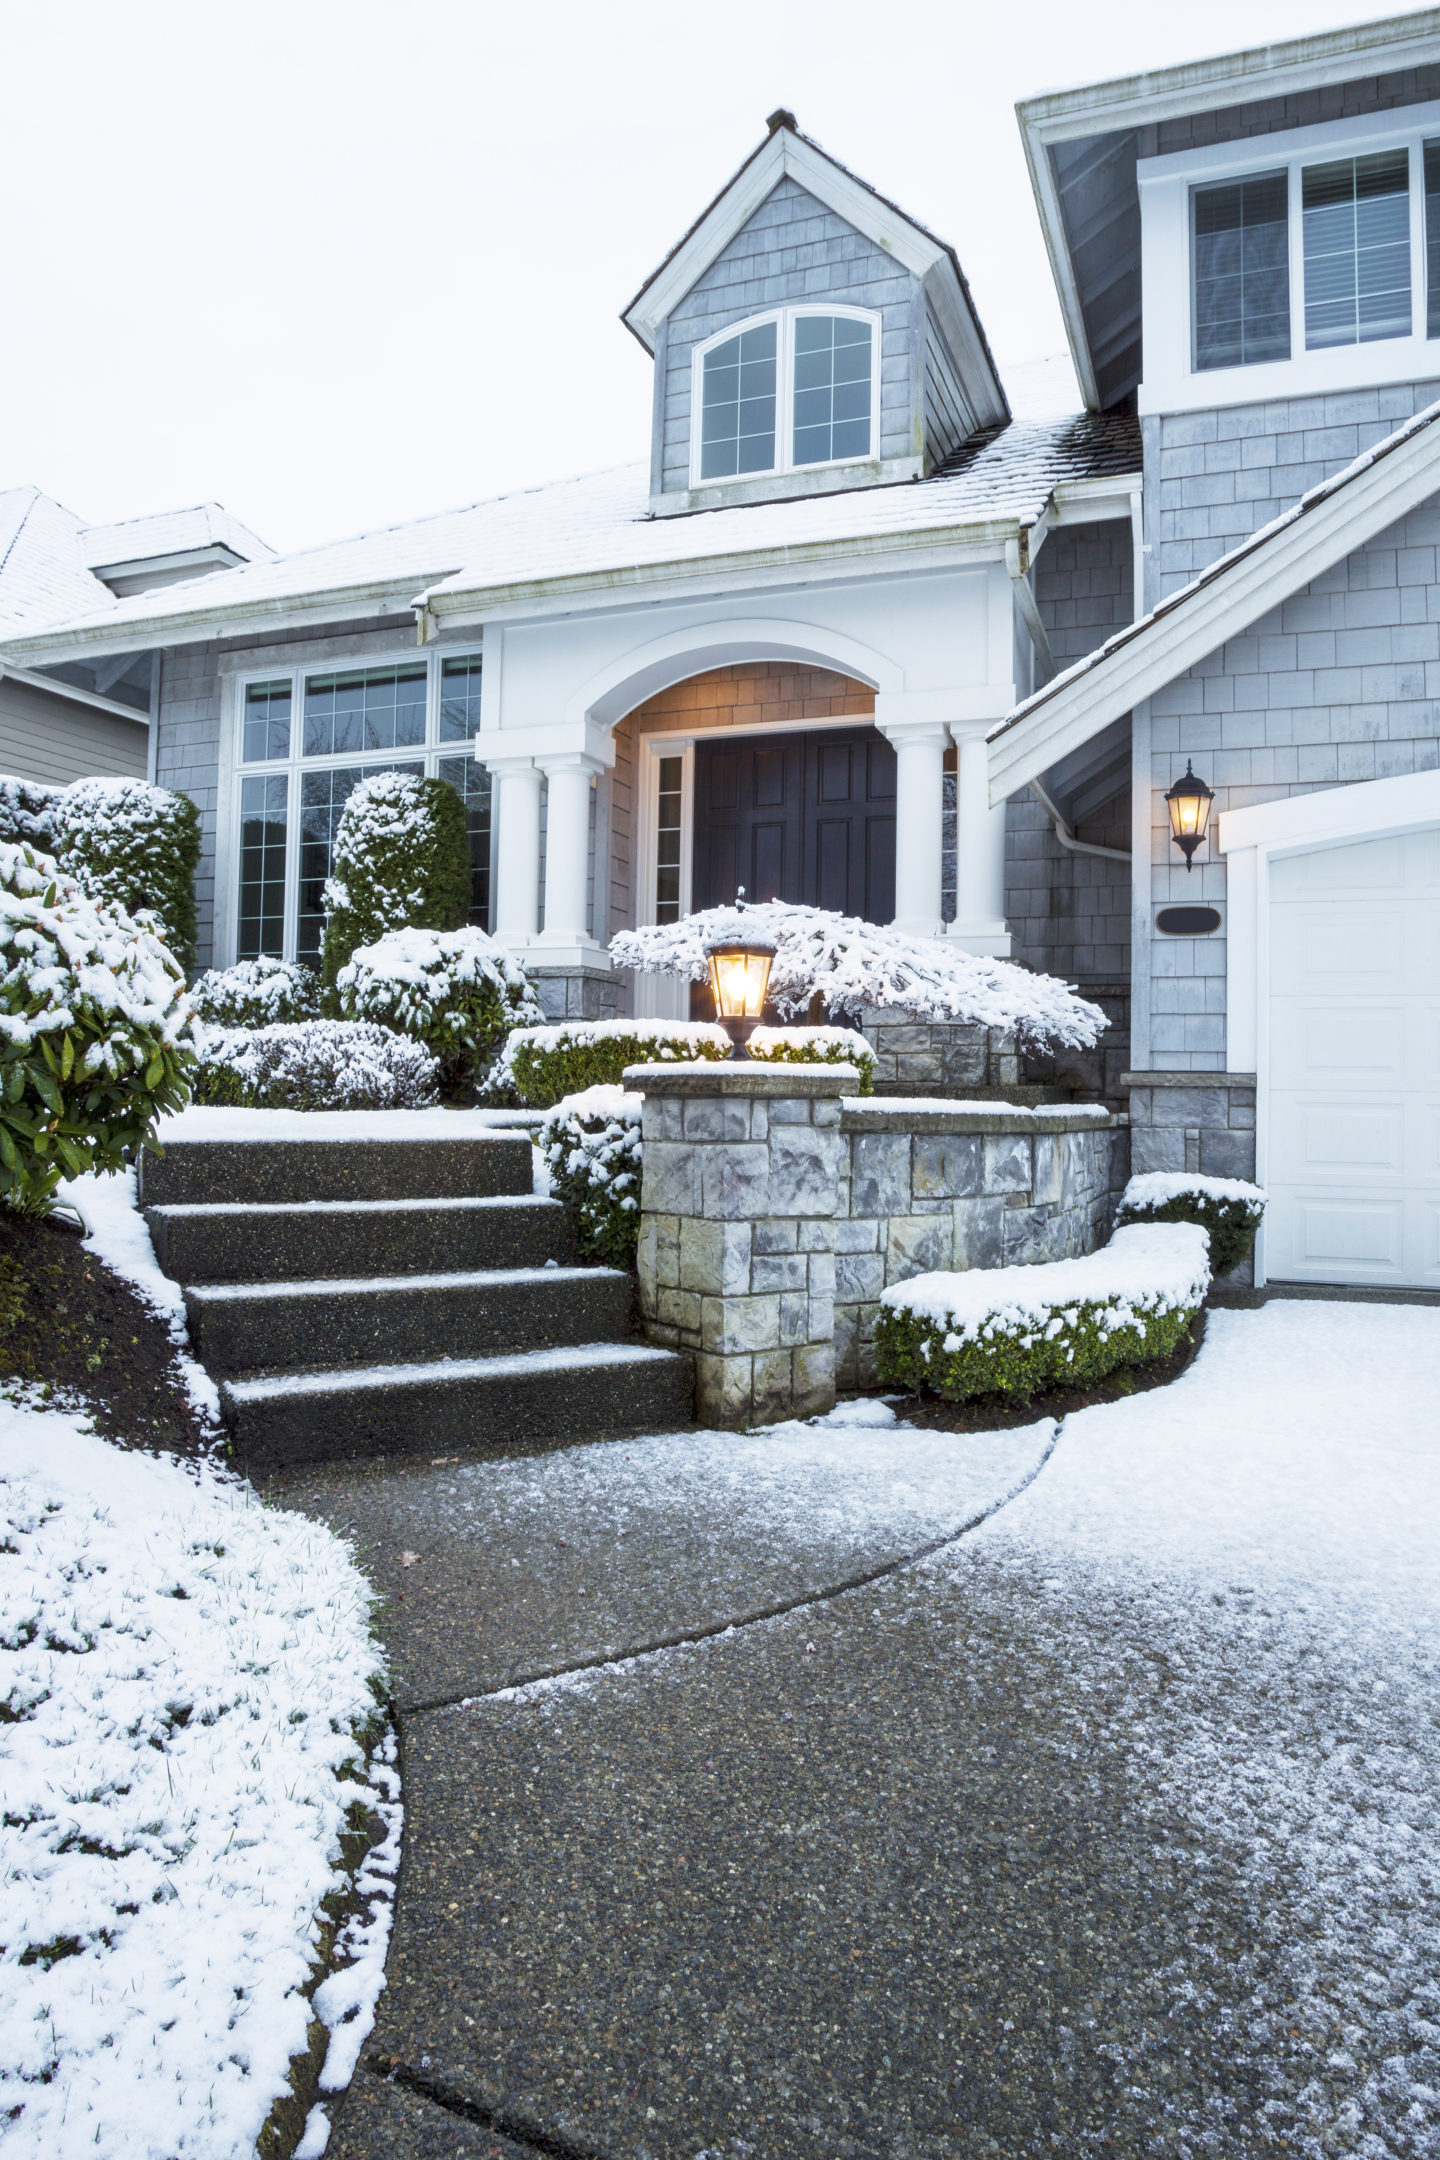 How to protect your landscaping this winter | Hittle Landscaping